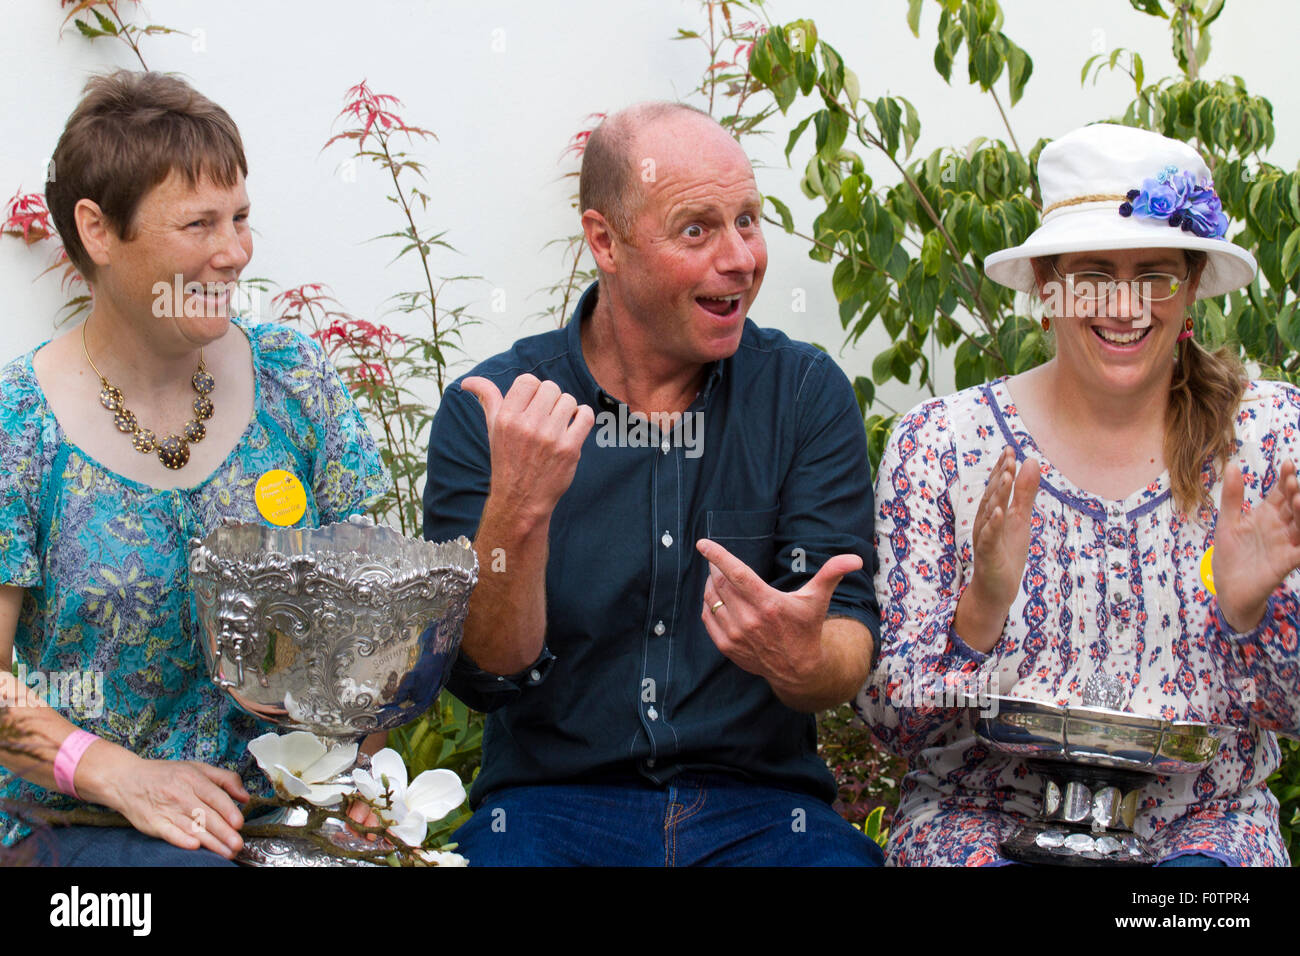 Southport, Merseyside, UK. 21st Aug, 2015. Joe Swift (born 25 May 1965) is an English garden designer, journalist and television personality.  Swift is a regular presenter and designer on the BBC's Gardeners' World, co-presenter on the Royal Horticultural Society Chelsea Flower Show, Gardeners' World Live, Hampton Court, RHS Tatton Park Flower Show, BBC's Small Town Gardens, and design judge on BBC's Gardener of the Year.  He is a garden designer, and has been involved in BBC2's Gardeners' World since 1998. Credit:  Cernan Elias/Alamy Live News Stock Photo